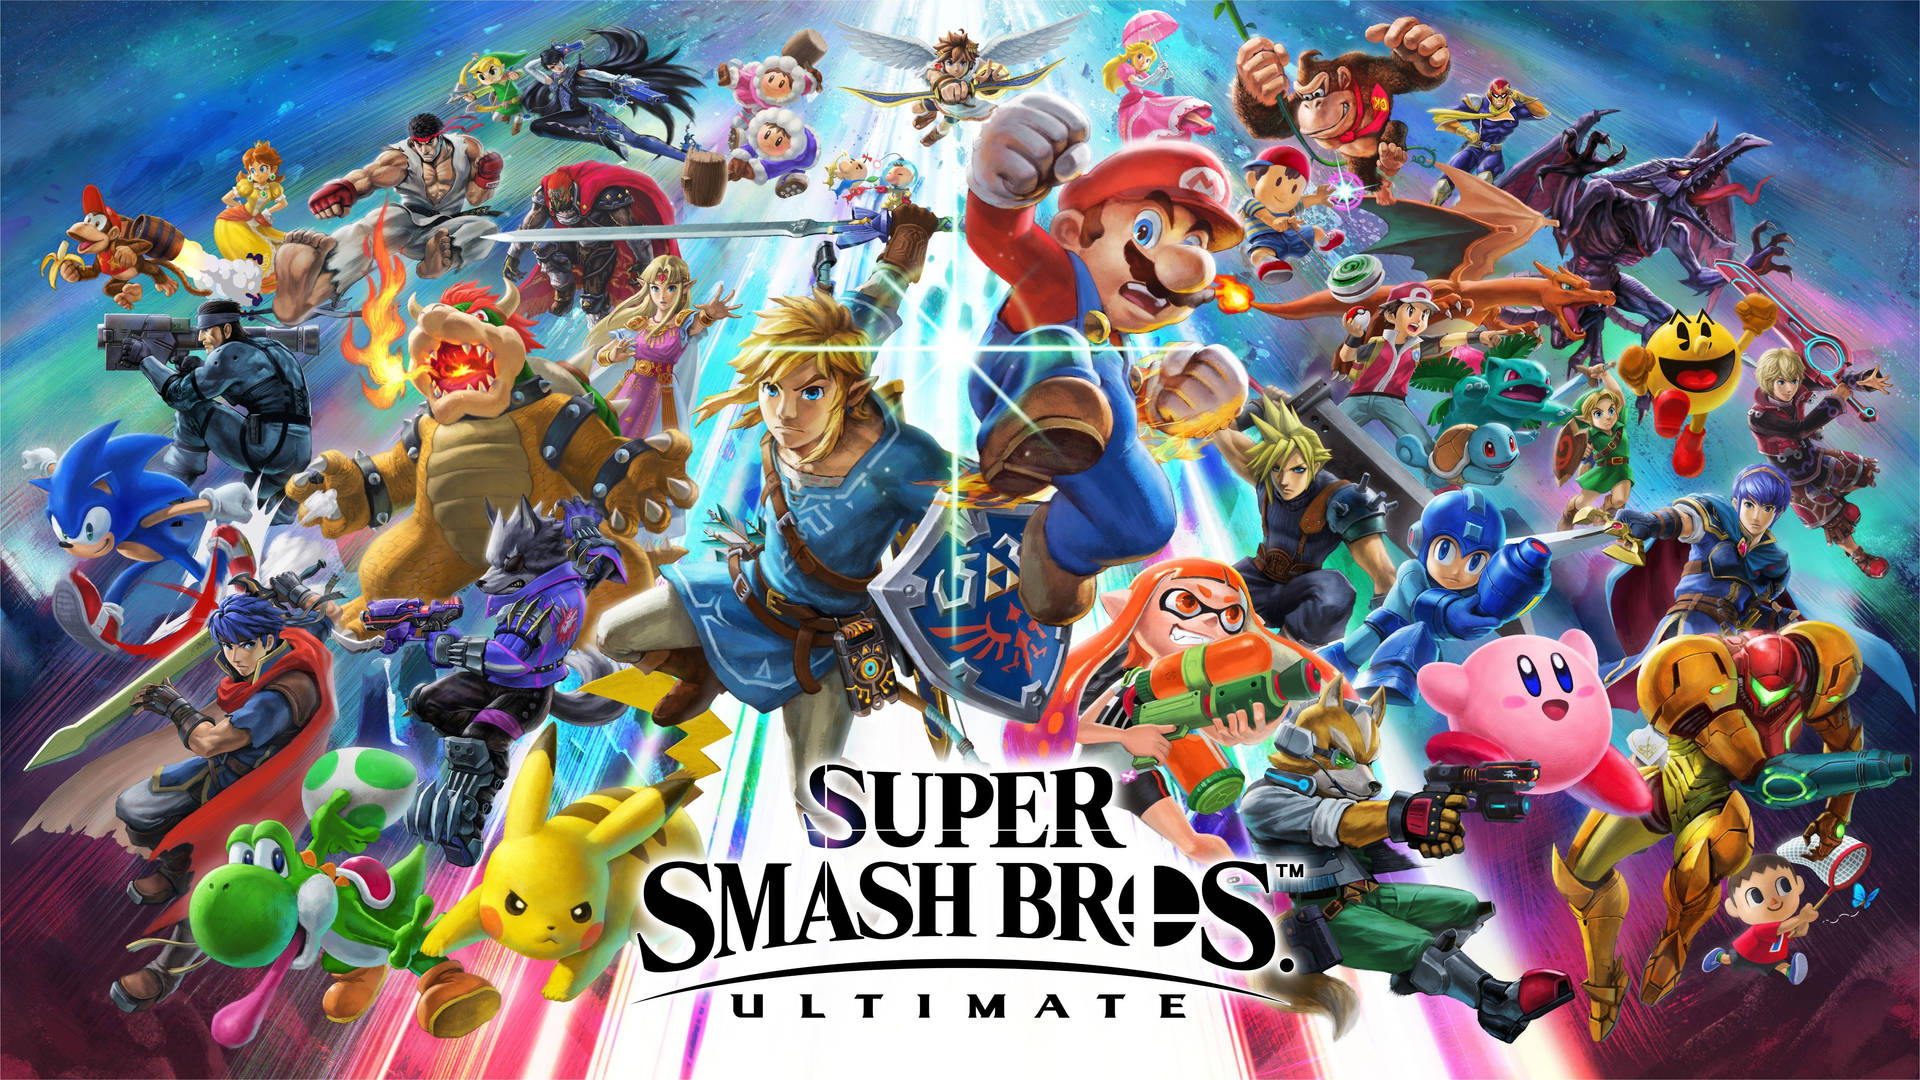 Smash Bros Ultimate Action Poster